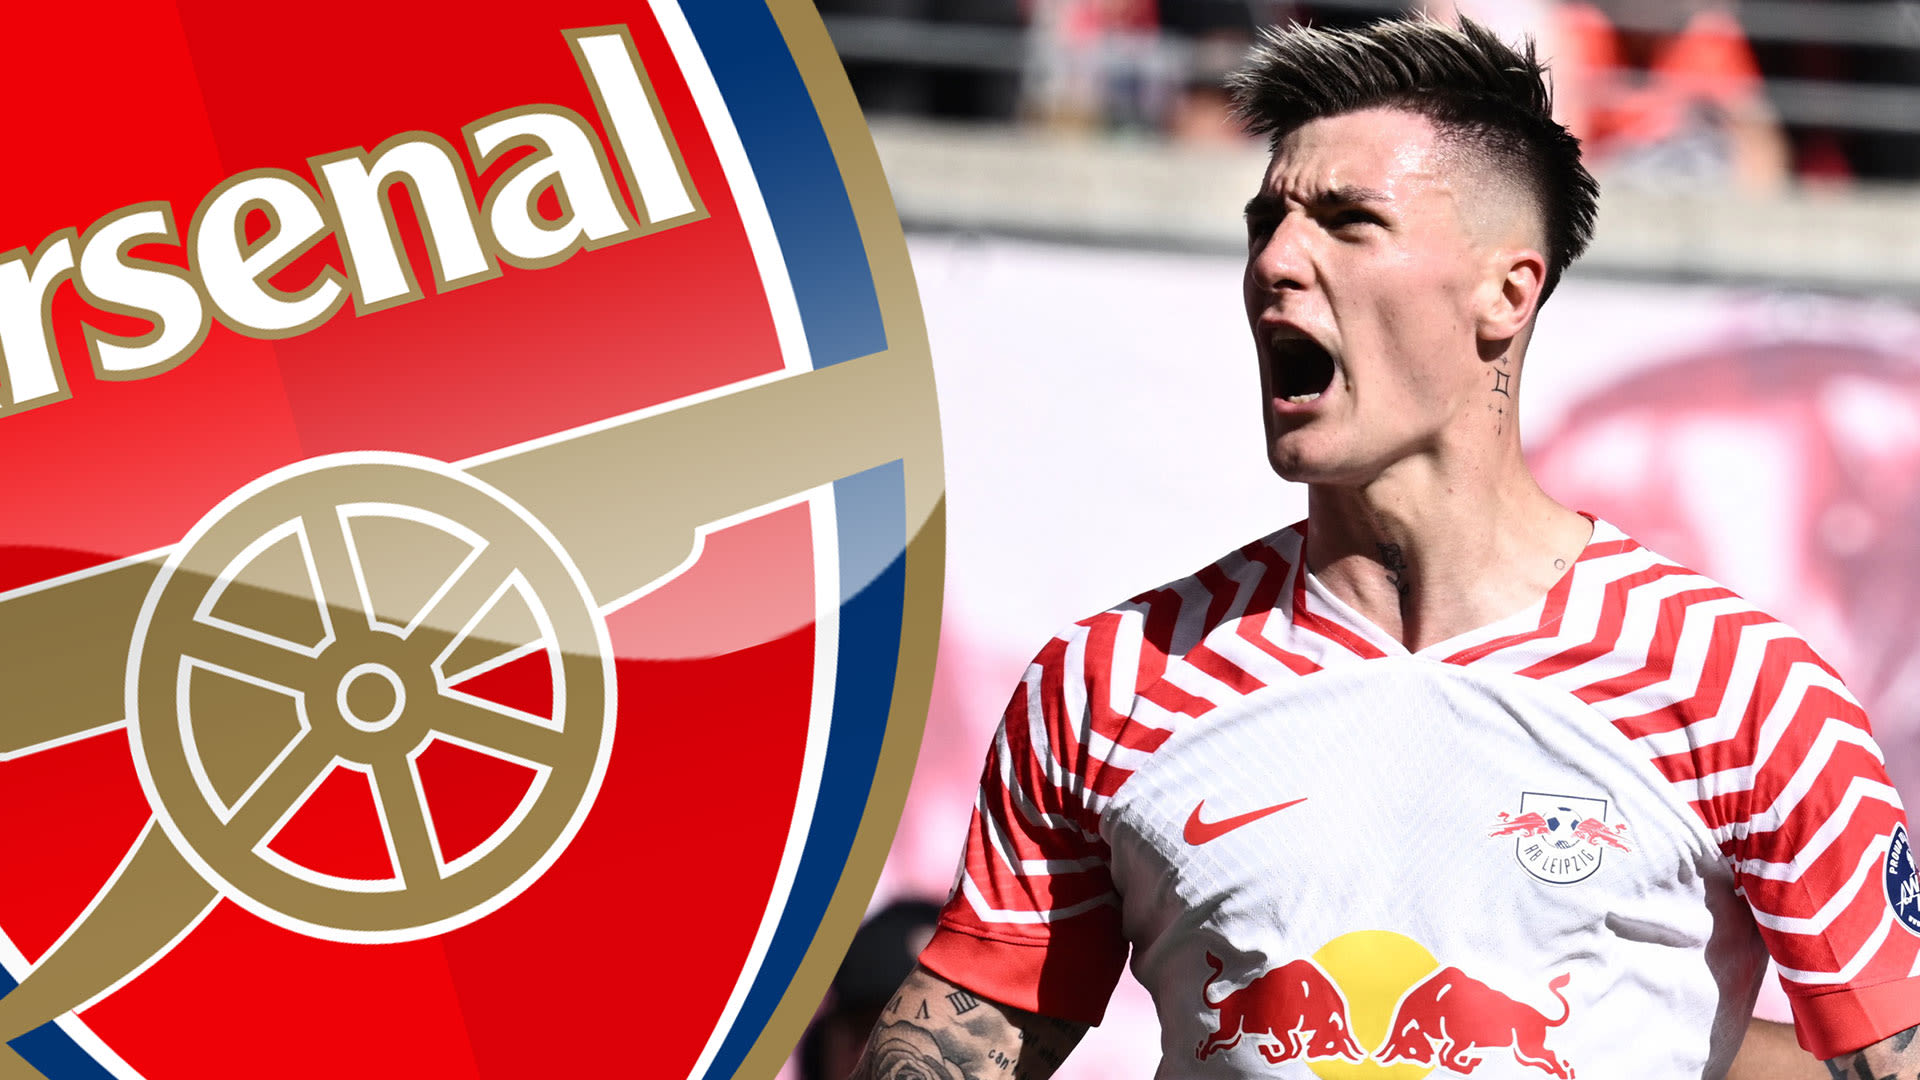 Arsenal 'in pole position to sign Sesko' but agent also spotted at Man Utd